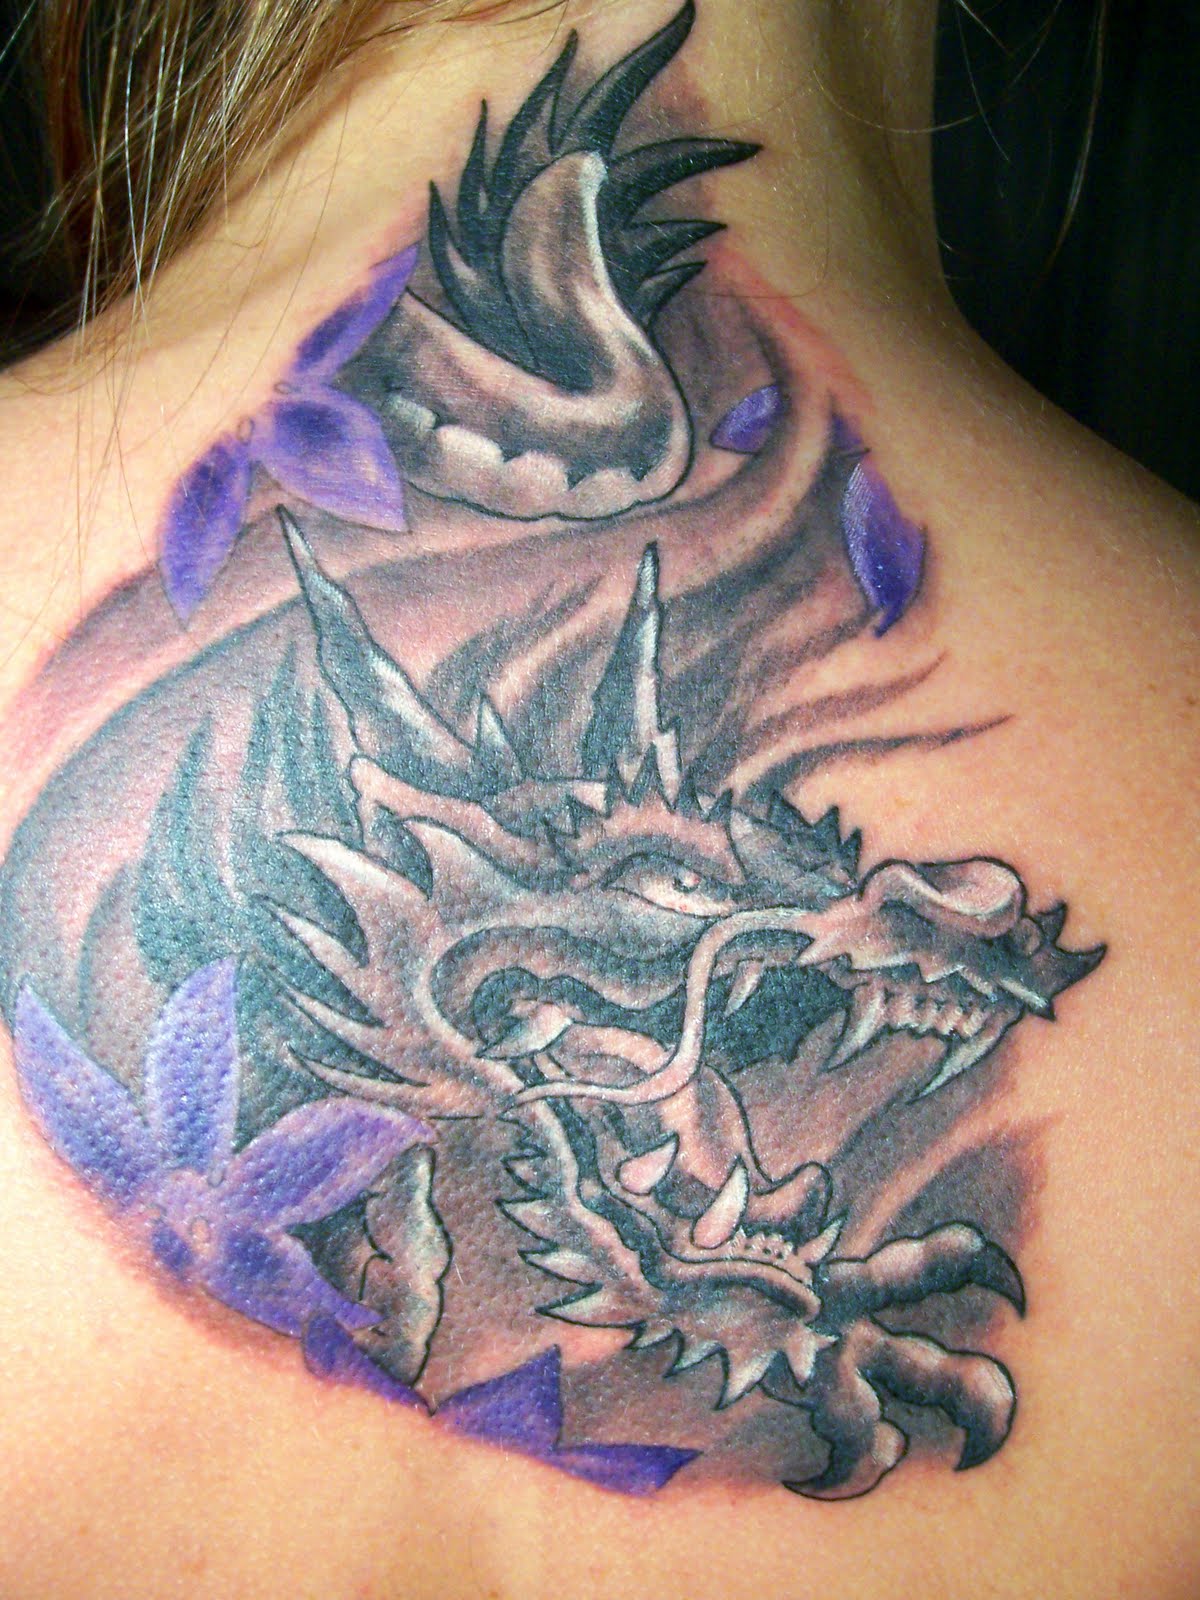 Japanese Dragon Tattoo Meaning